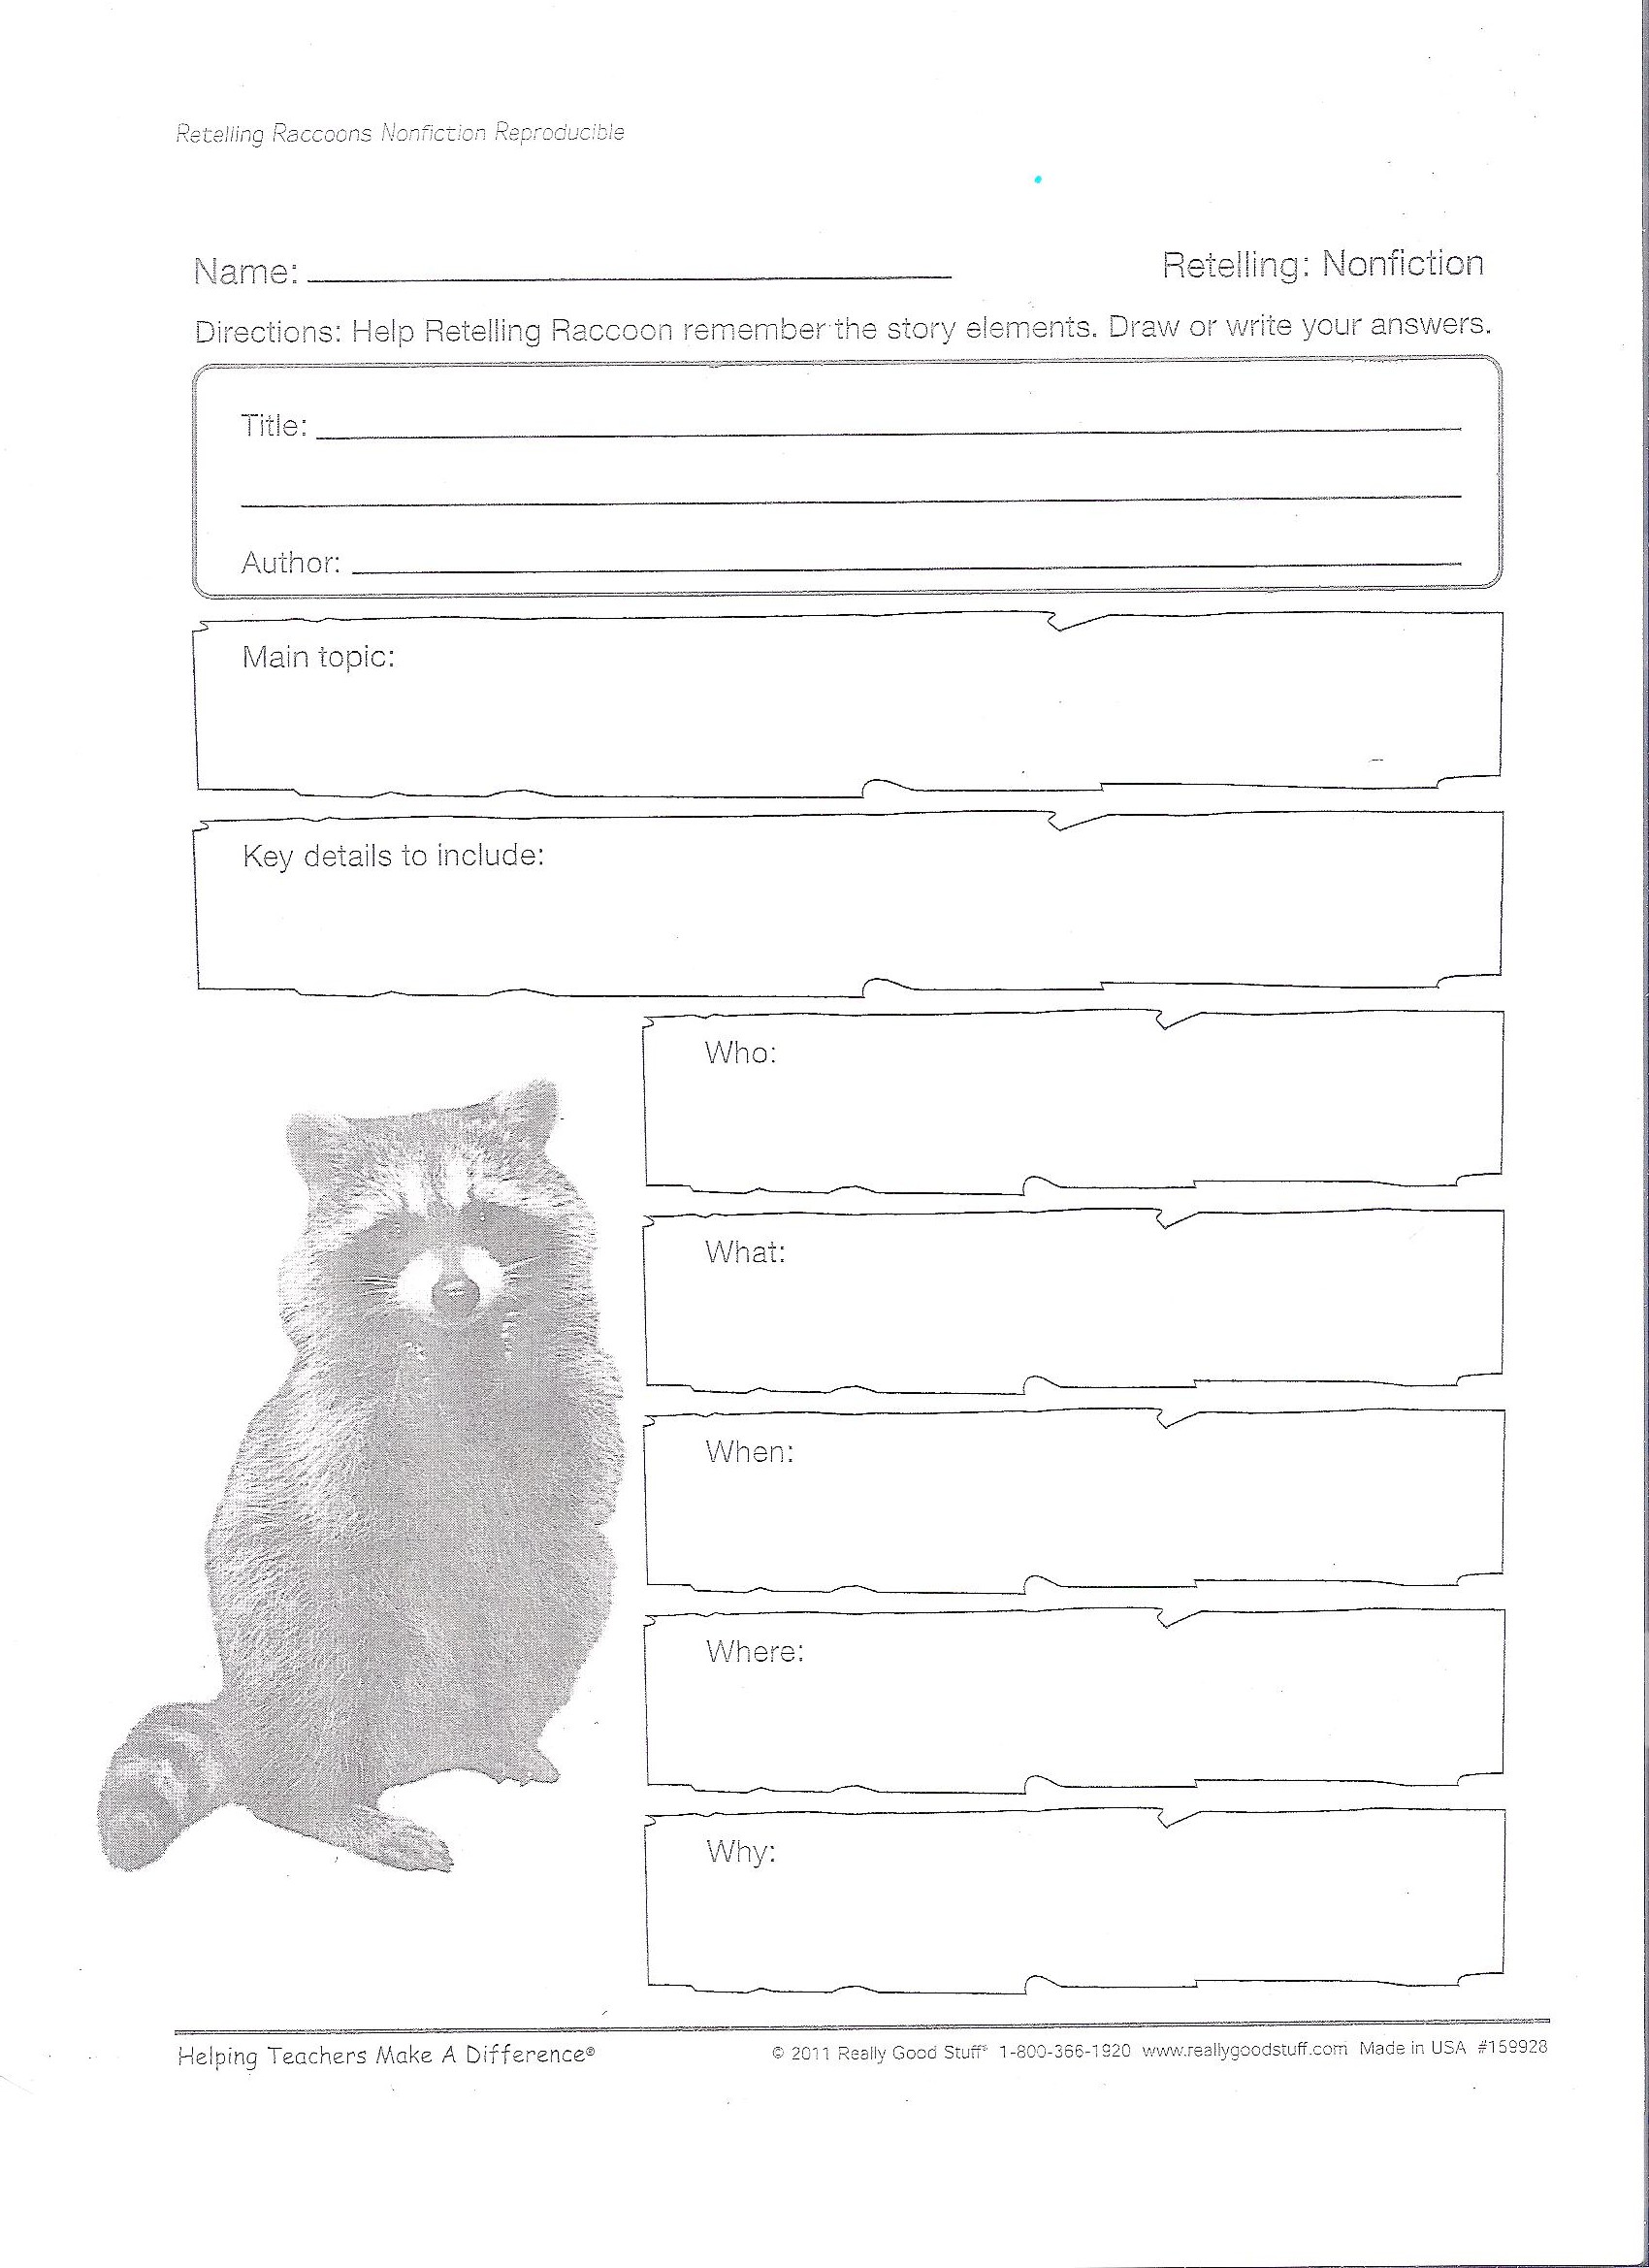 Non fiction book report forms